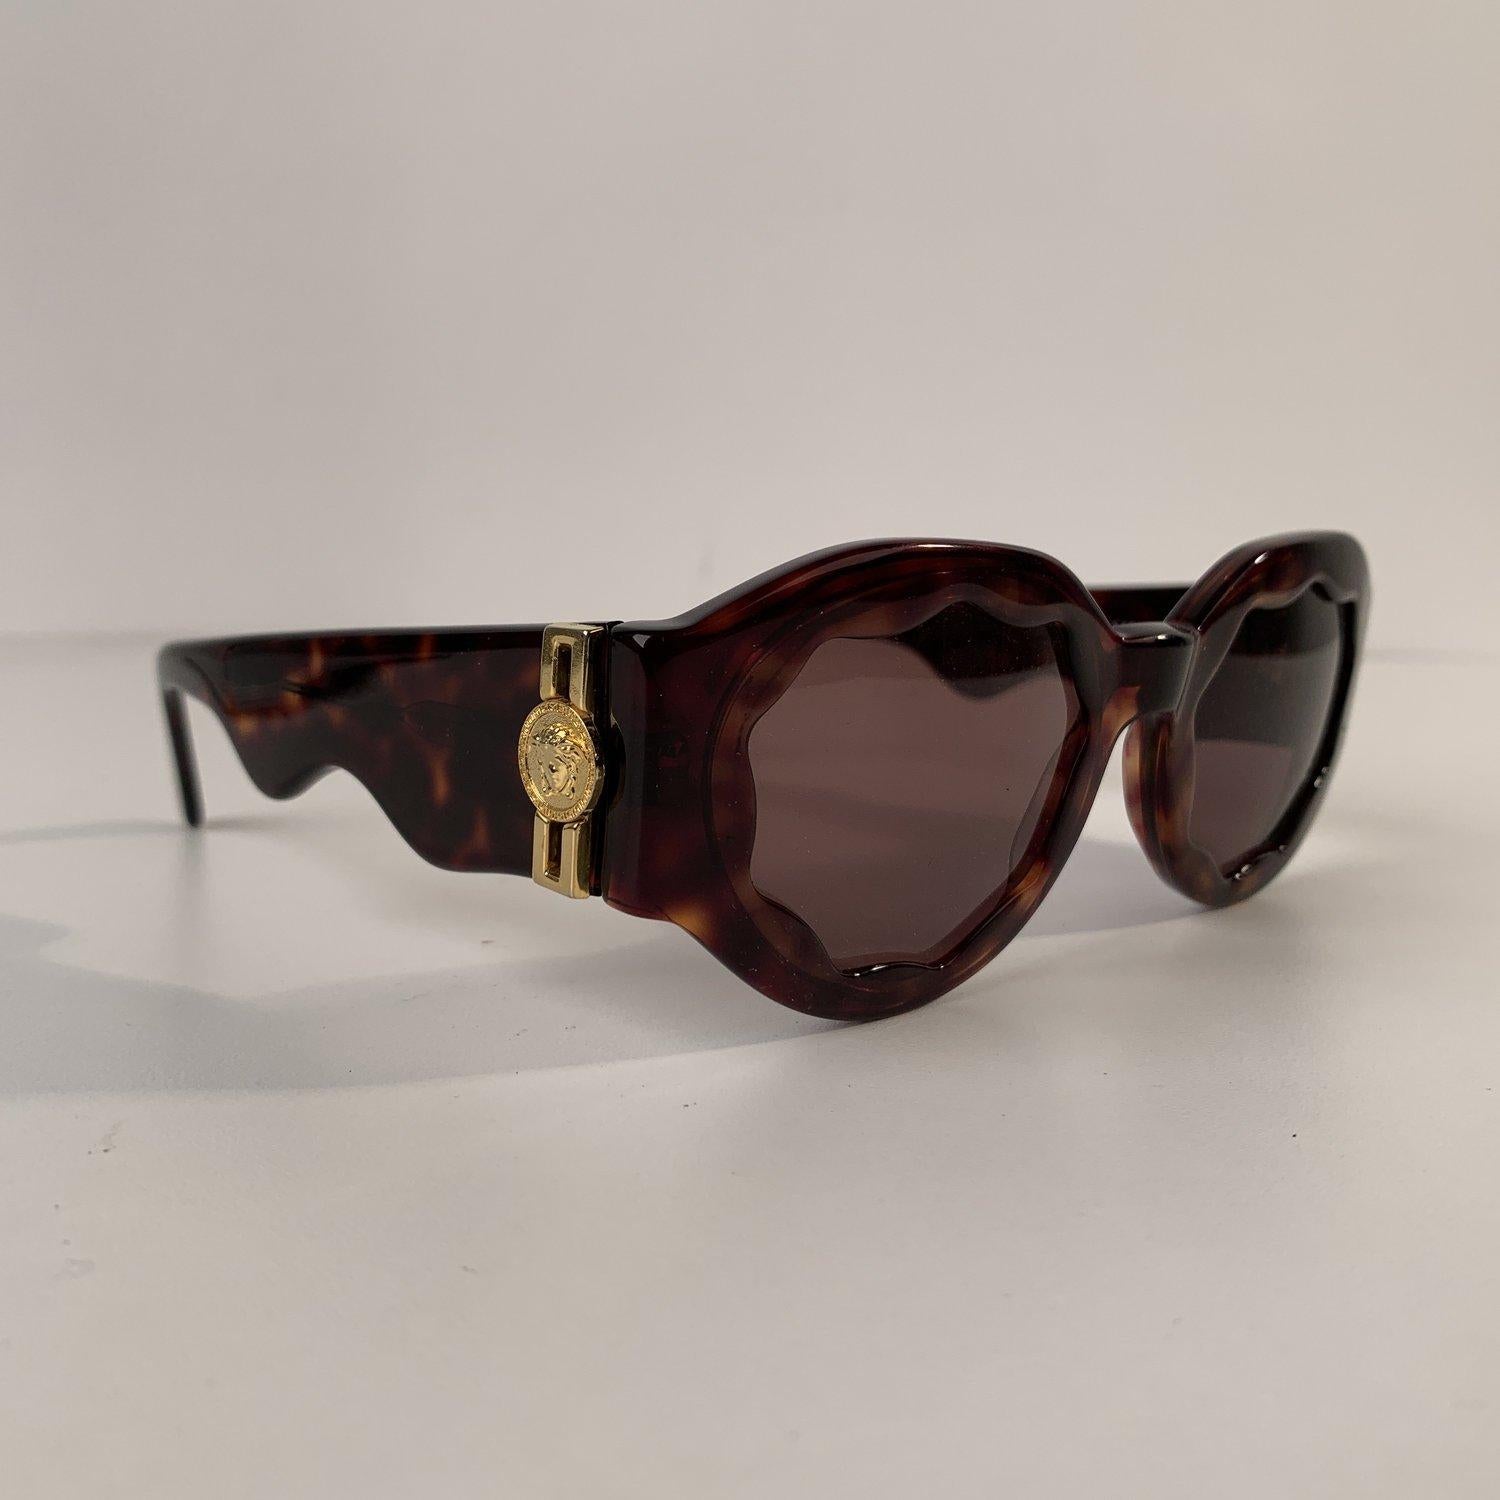 Brown, Oval-shaped vintage sunglasses Mod. S13 - Col. 740 by Gianni Versace. Iconic 90s sunglasses with gold metal Medusa on temples. made in Italy. Original 100% Total UVA UVB protection original lenses in brown color.



Details

MATERIAL: